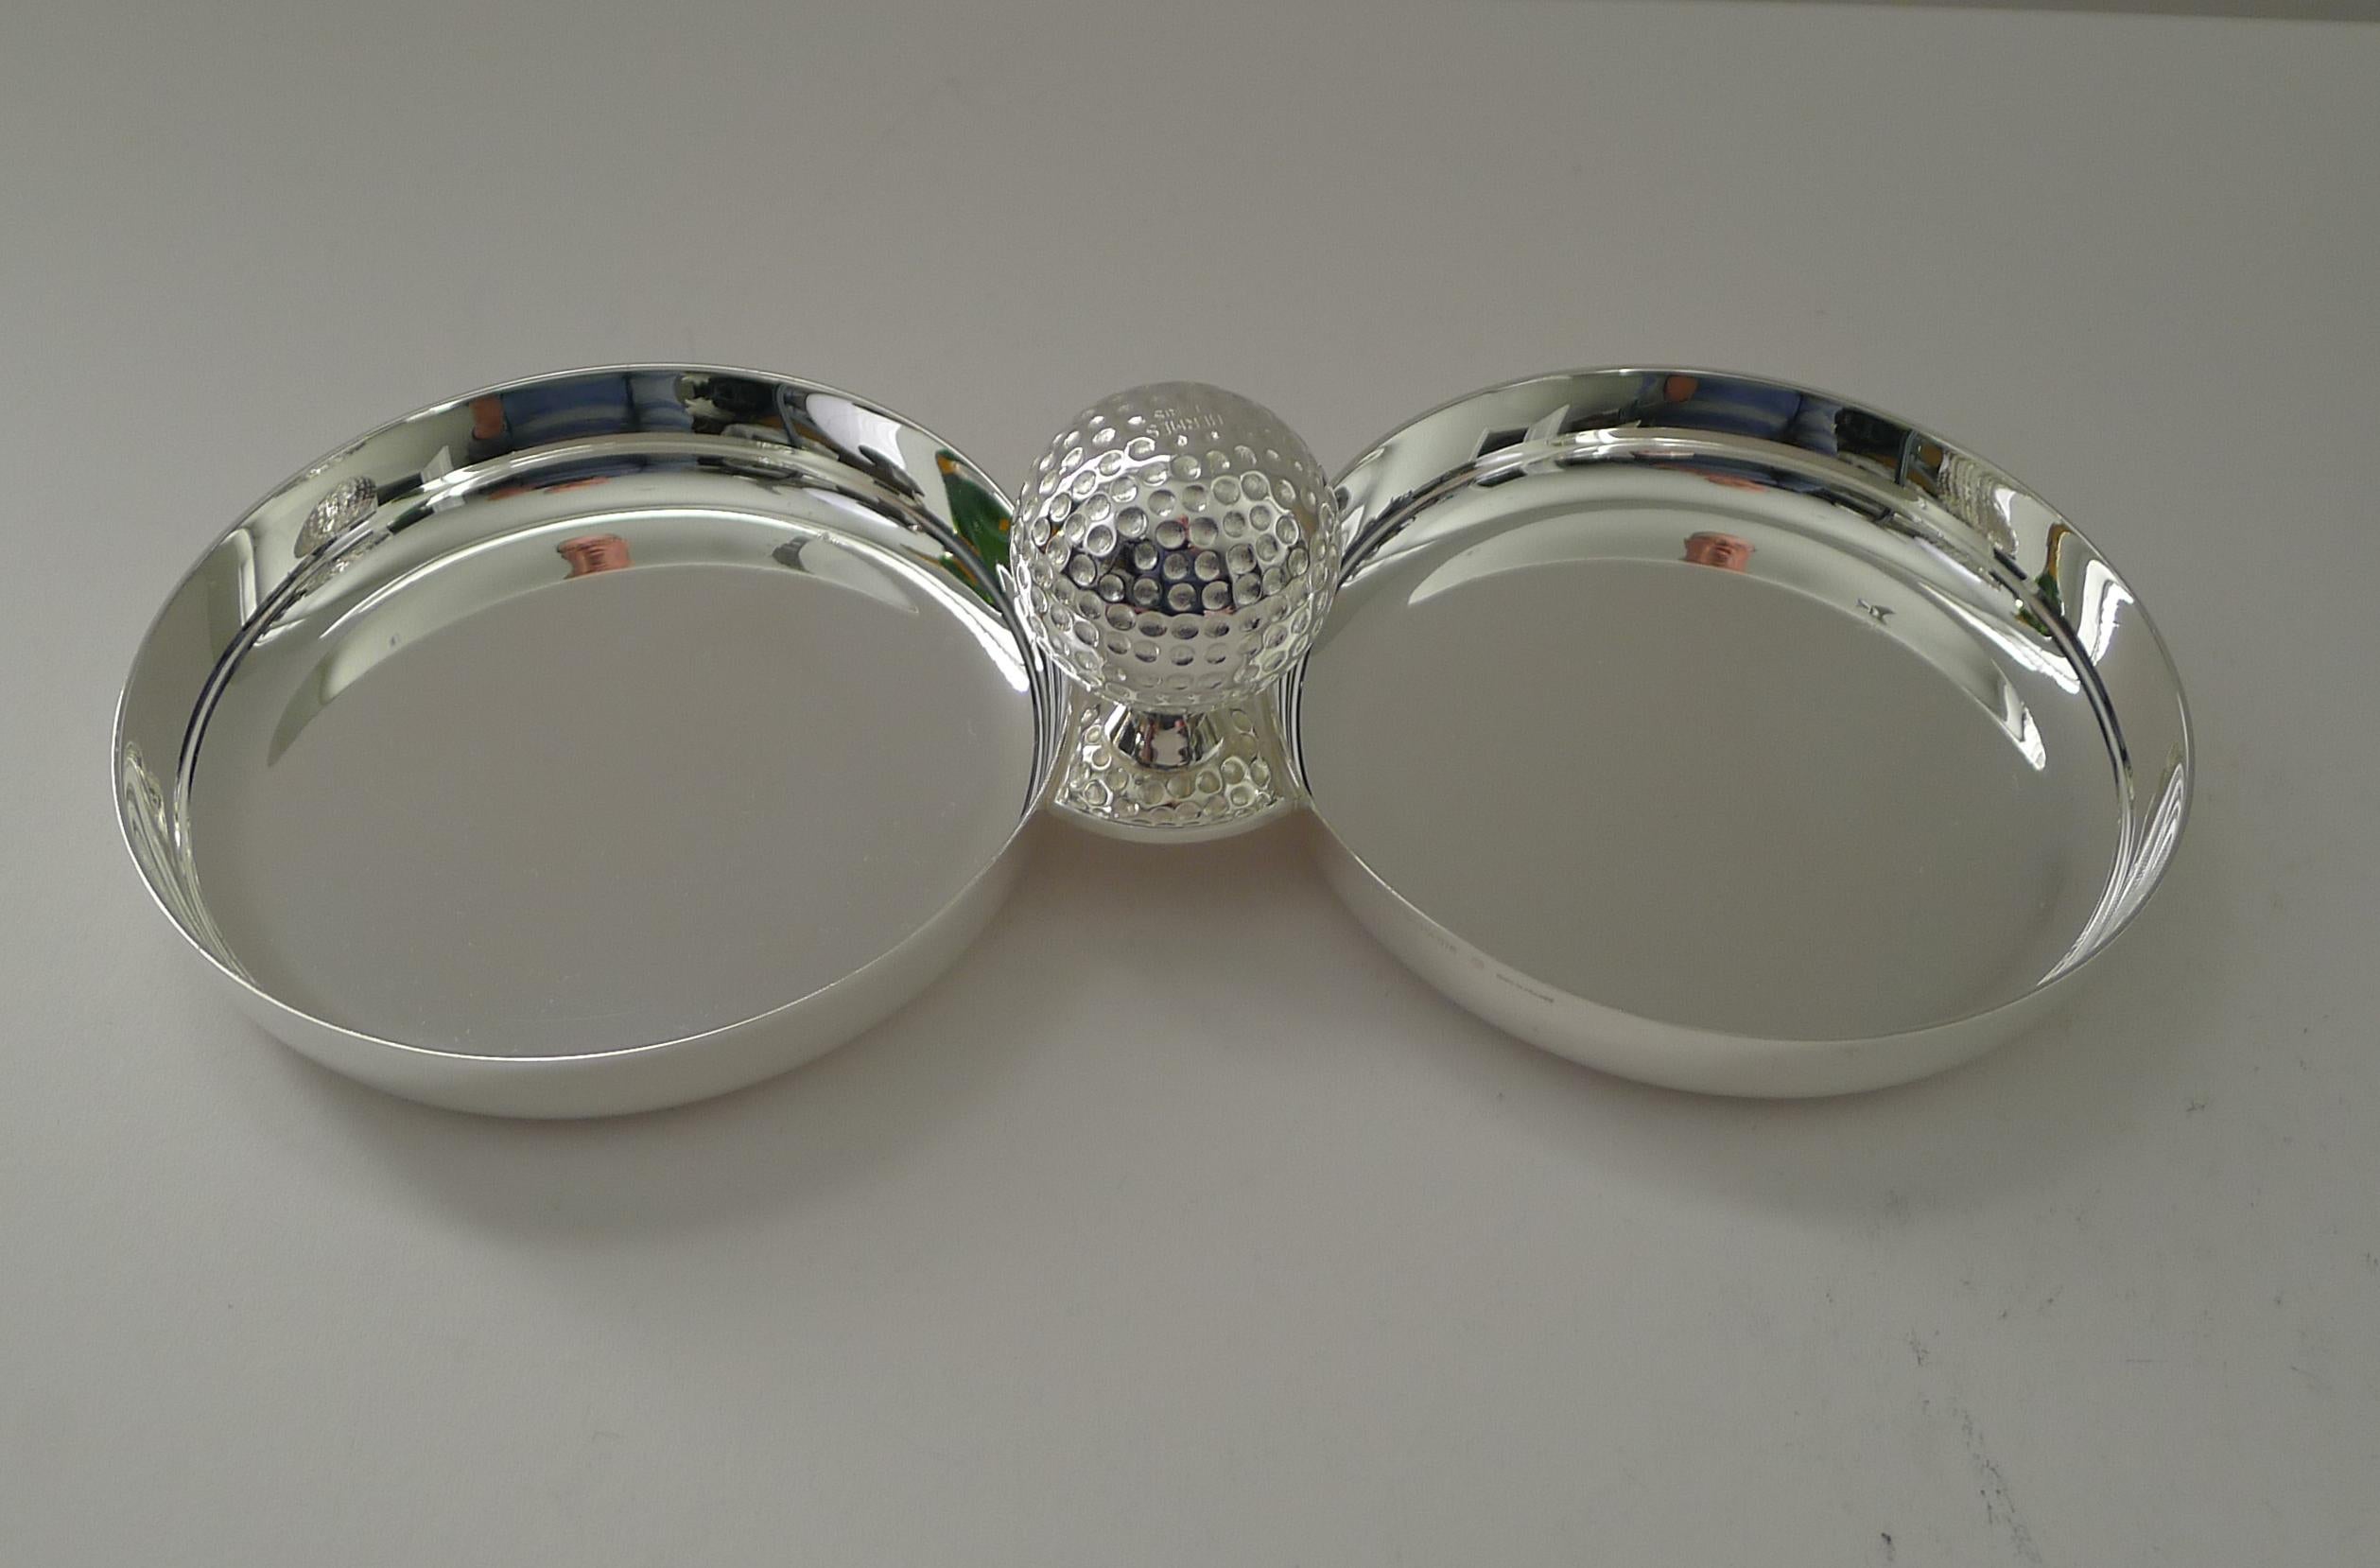 A handsome and rare pair of silver plated dishes or bowls jointed together with a decorative Golf ball handle in the centre.

Just back from our silversmith's workshop where it has been professionally cleaned and polished, restoring it to it's